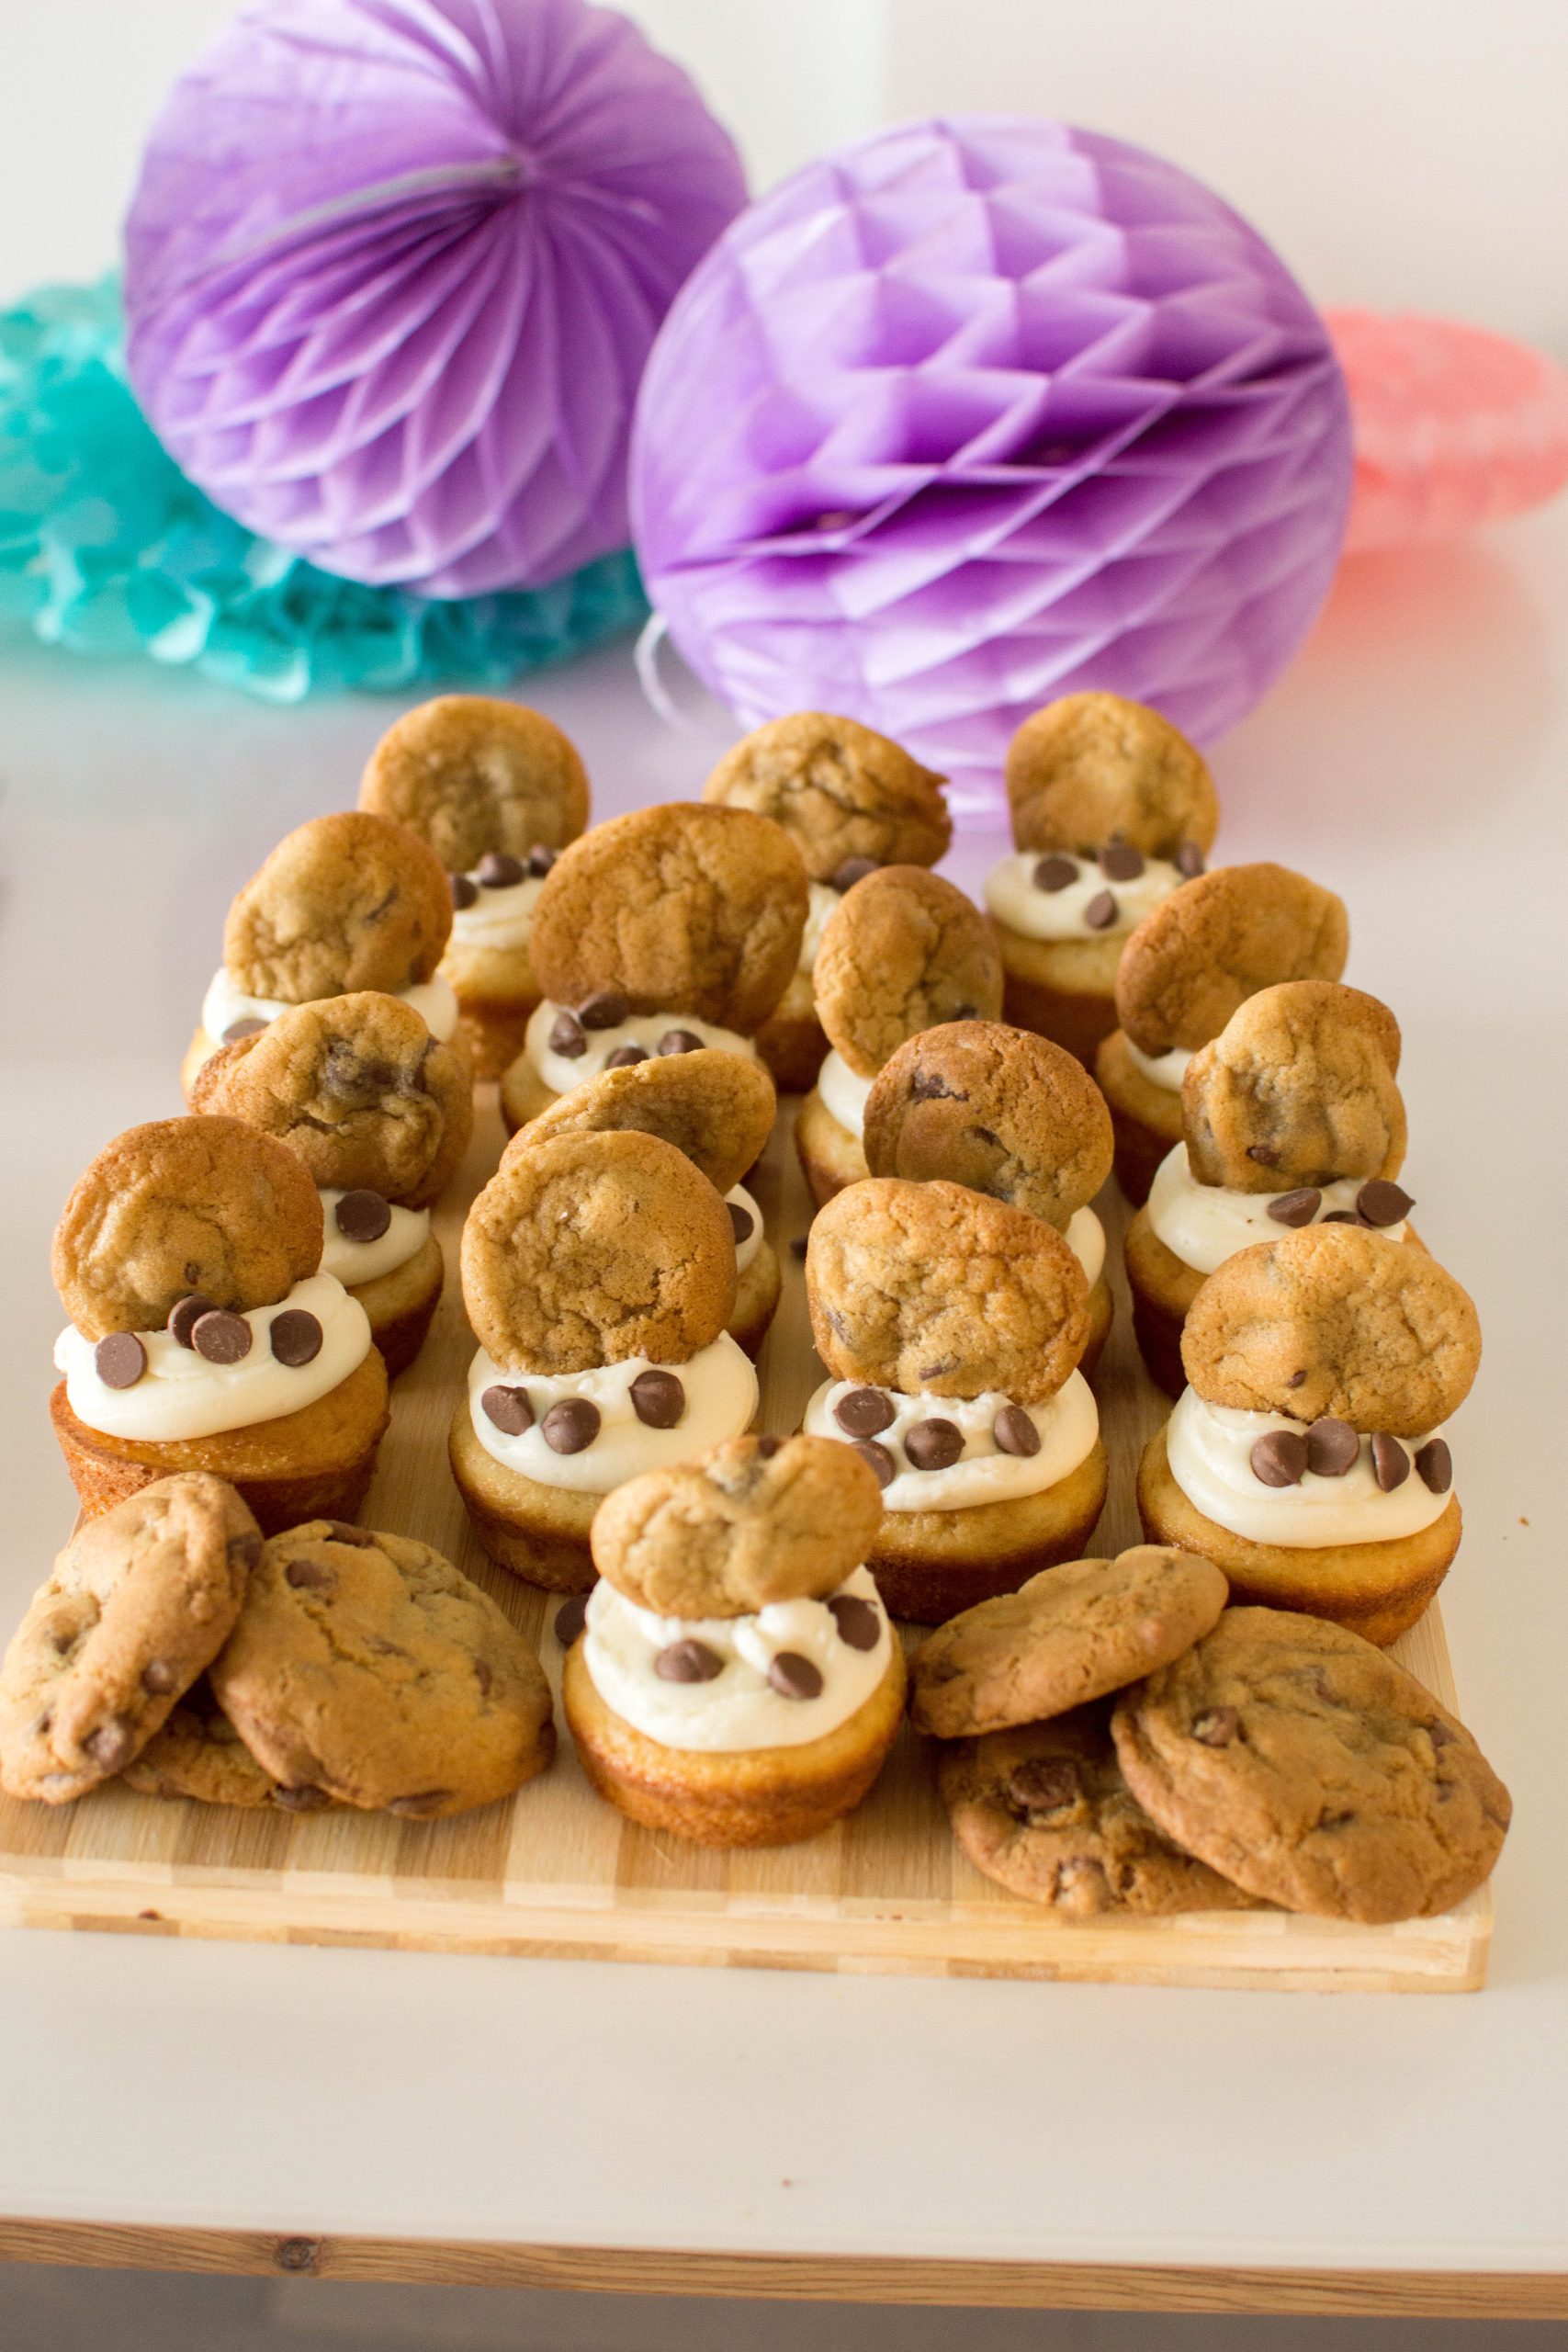 Ever heard of a cookie party? Prepare your sweet tooth – because it’s got TONS of cookies coming its way! Our recent cookie-themed party was definitely worth celebrating, and today we’re showing you how to throw one!